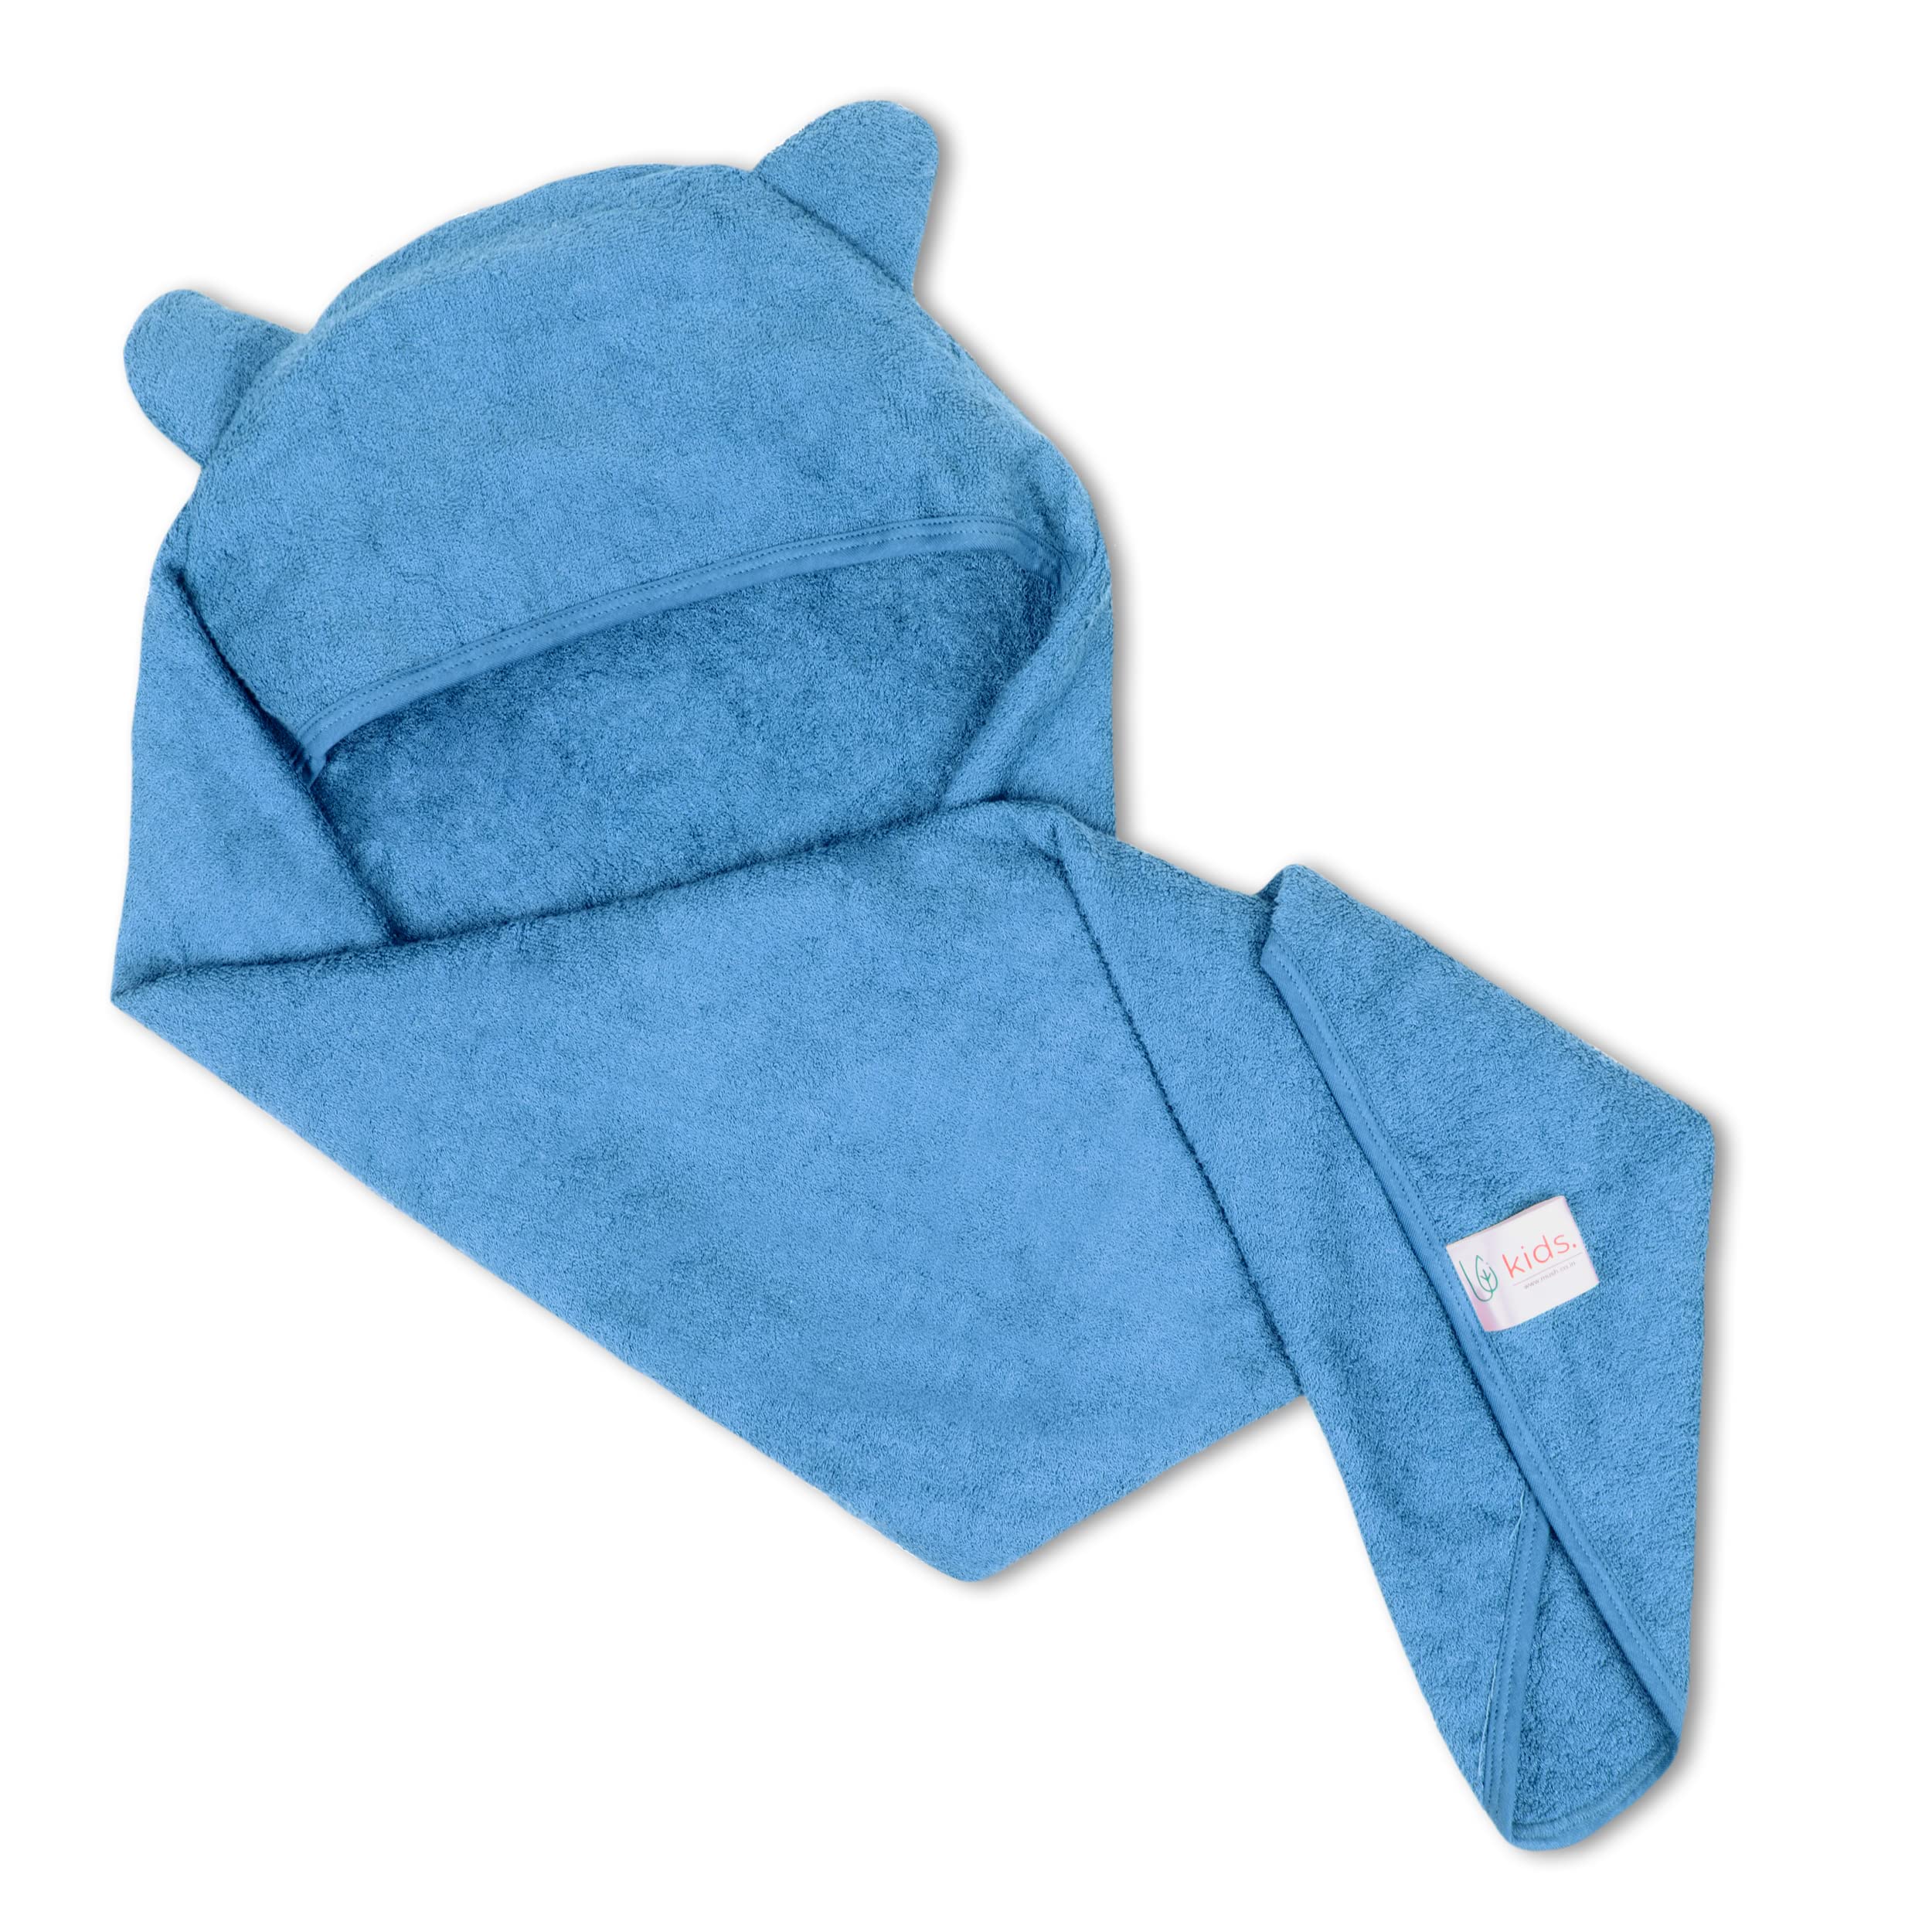 Mush Ultra Soft & Super Absorbent Bamboo Hooded Towel for Kids (1, Blue)